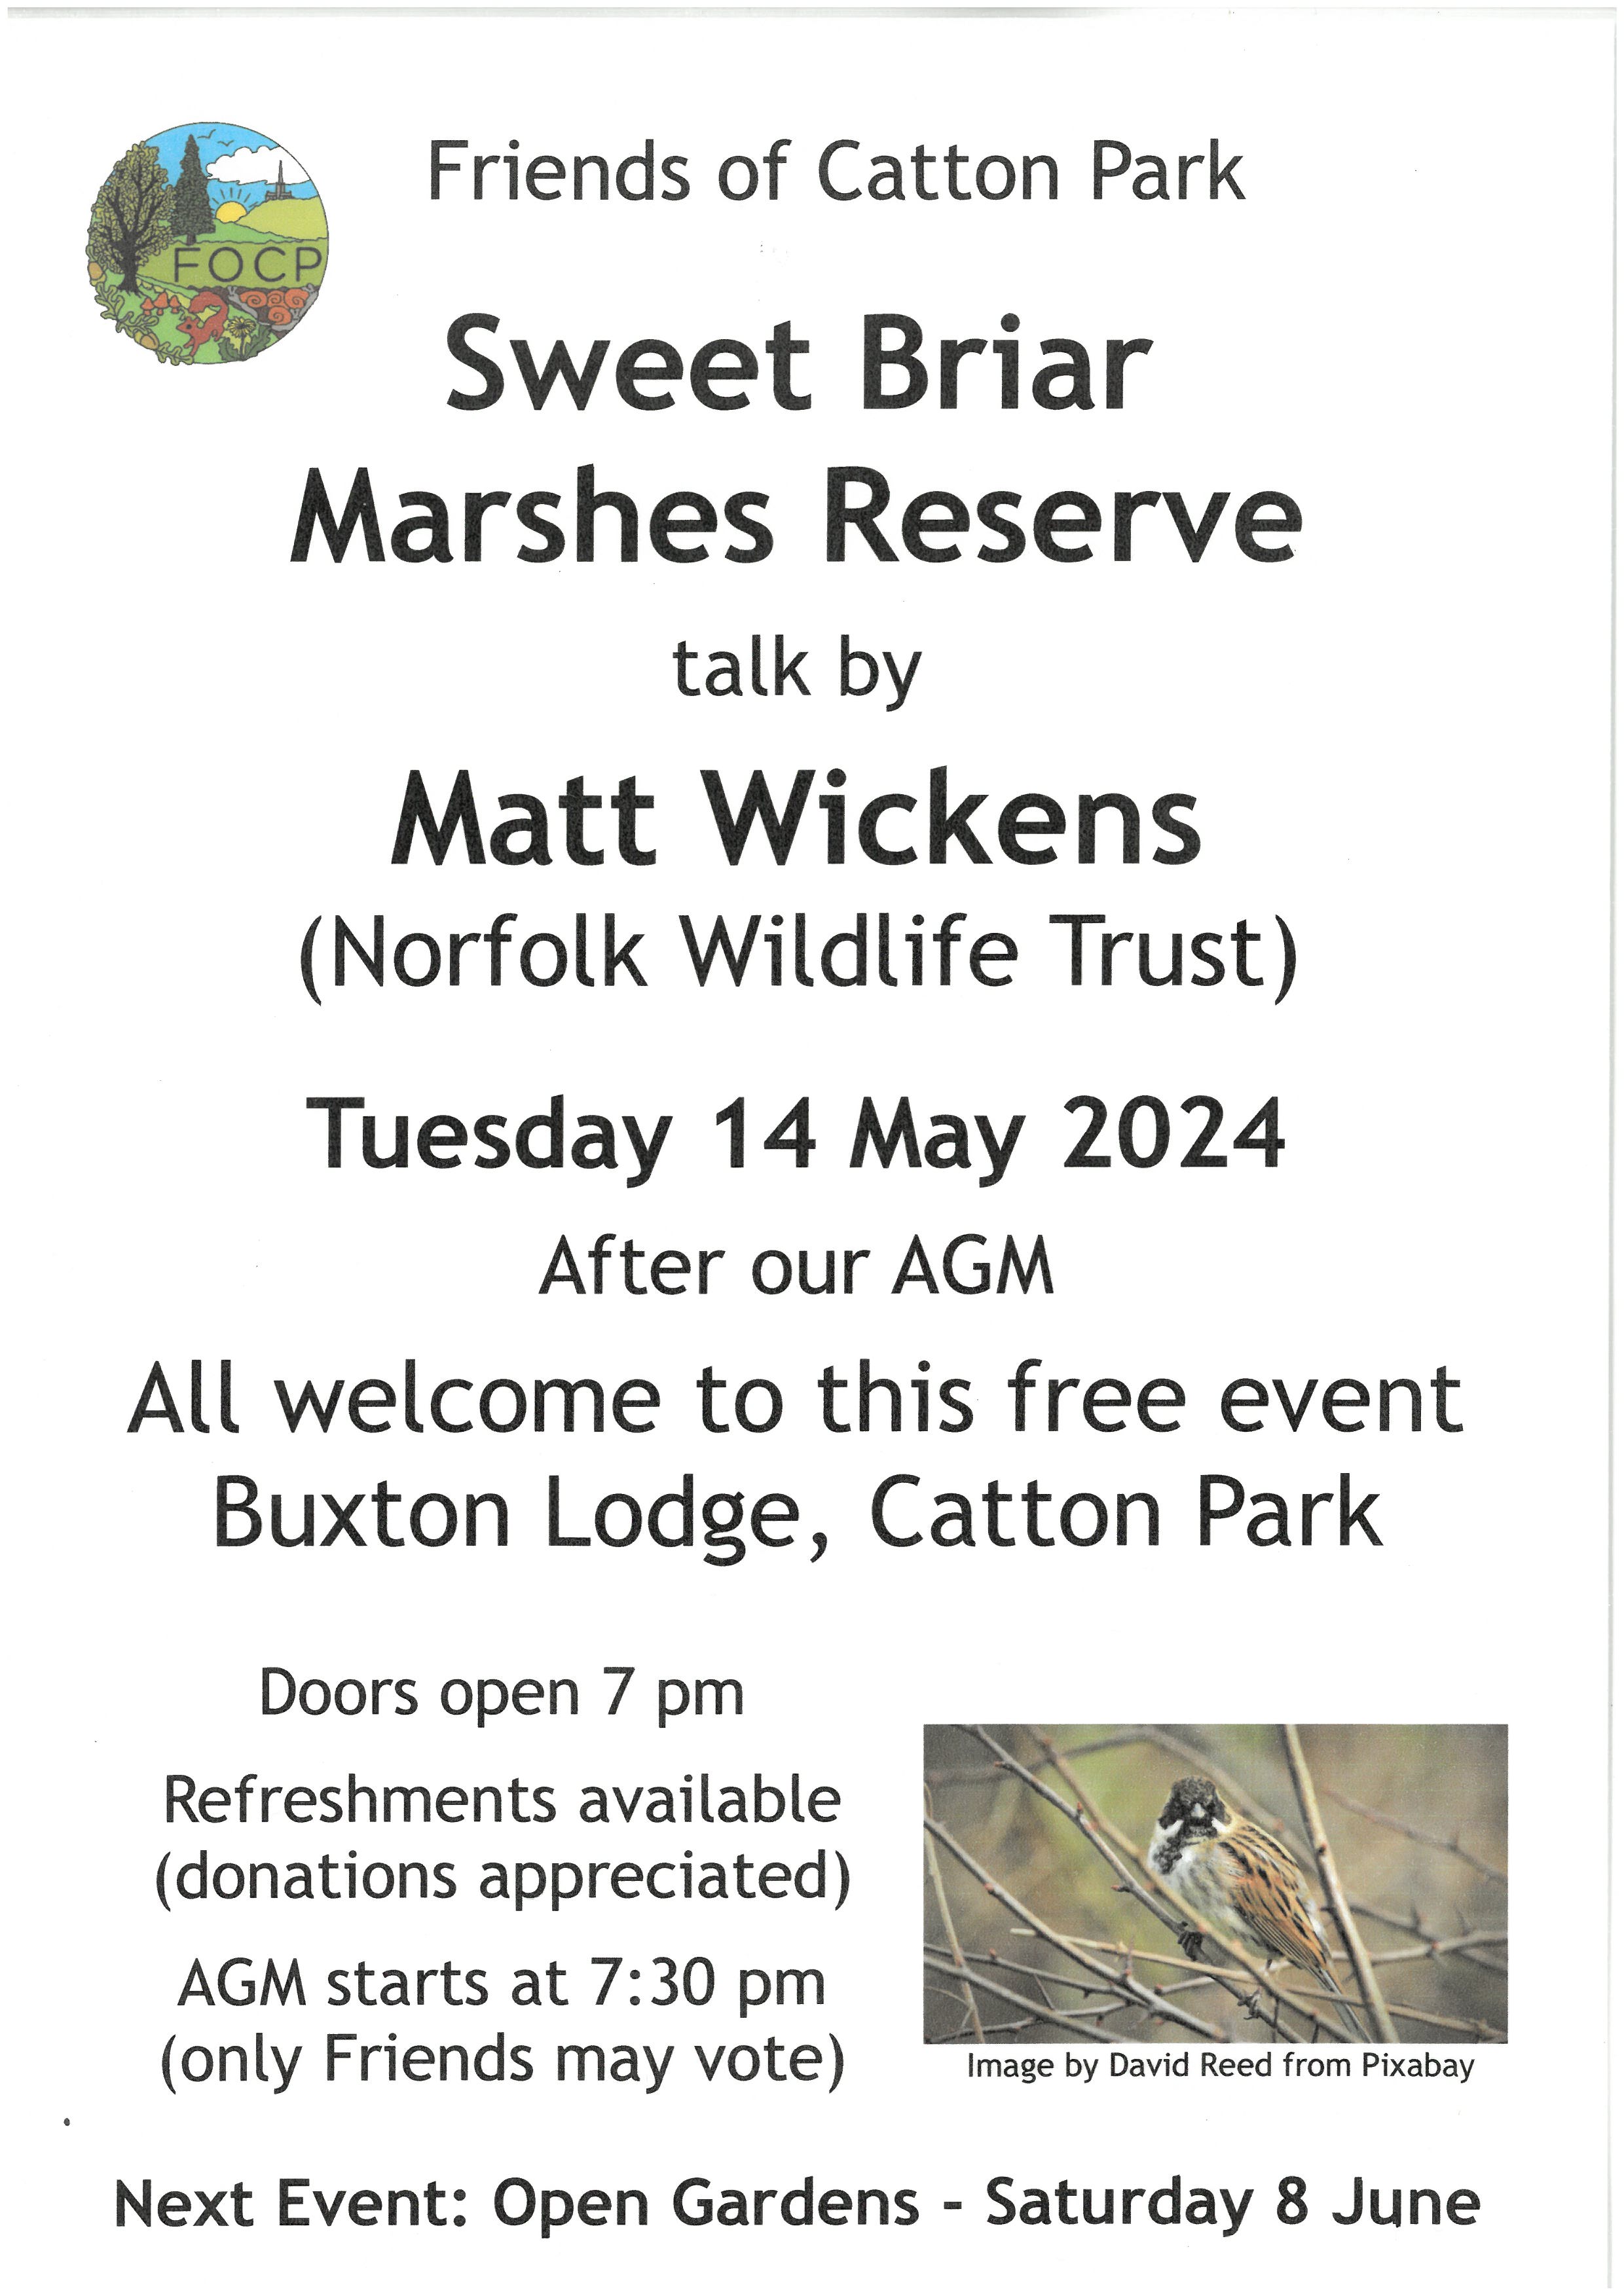 Friends of Catton Park AGM - 14th May 2024